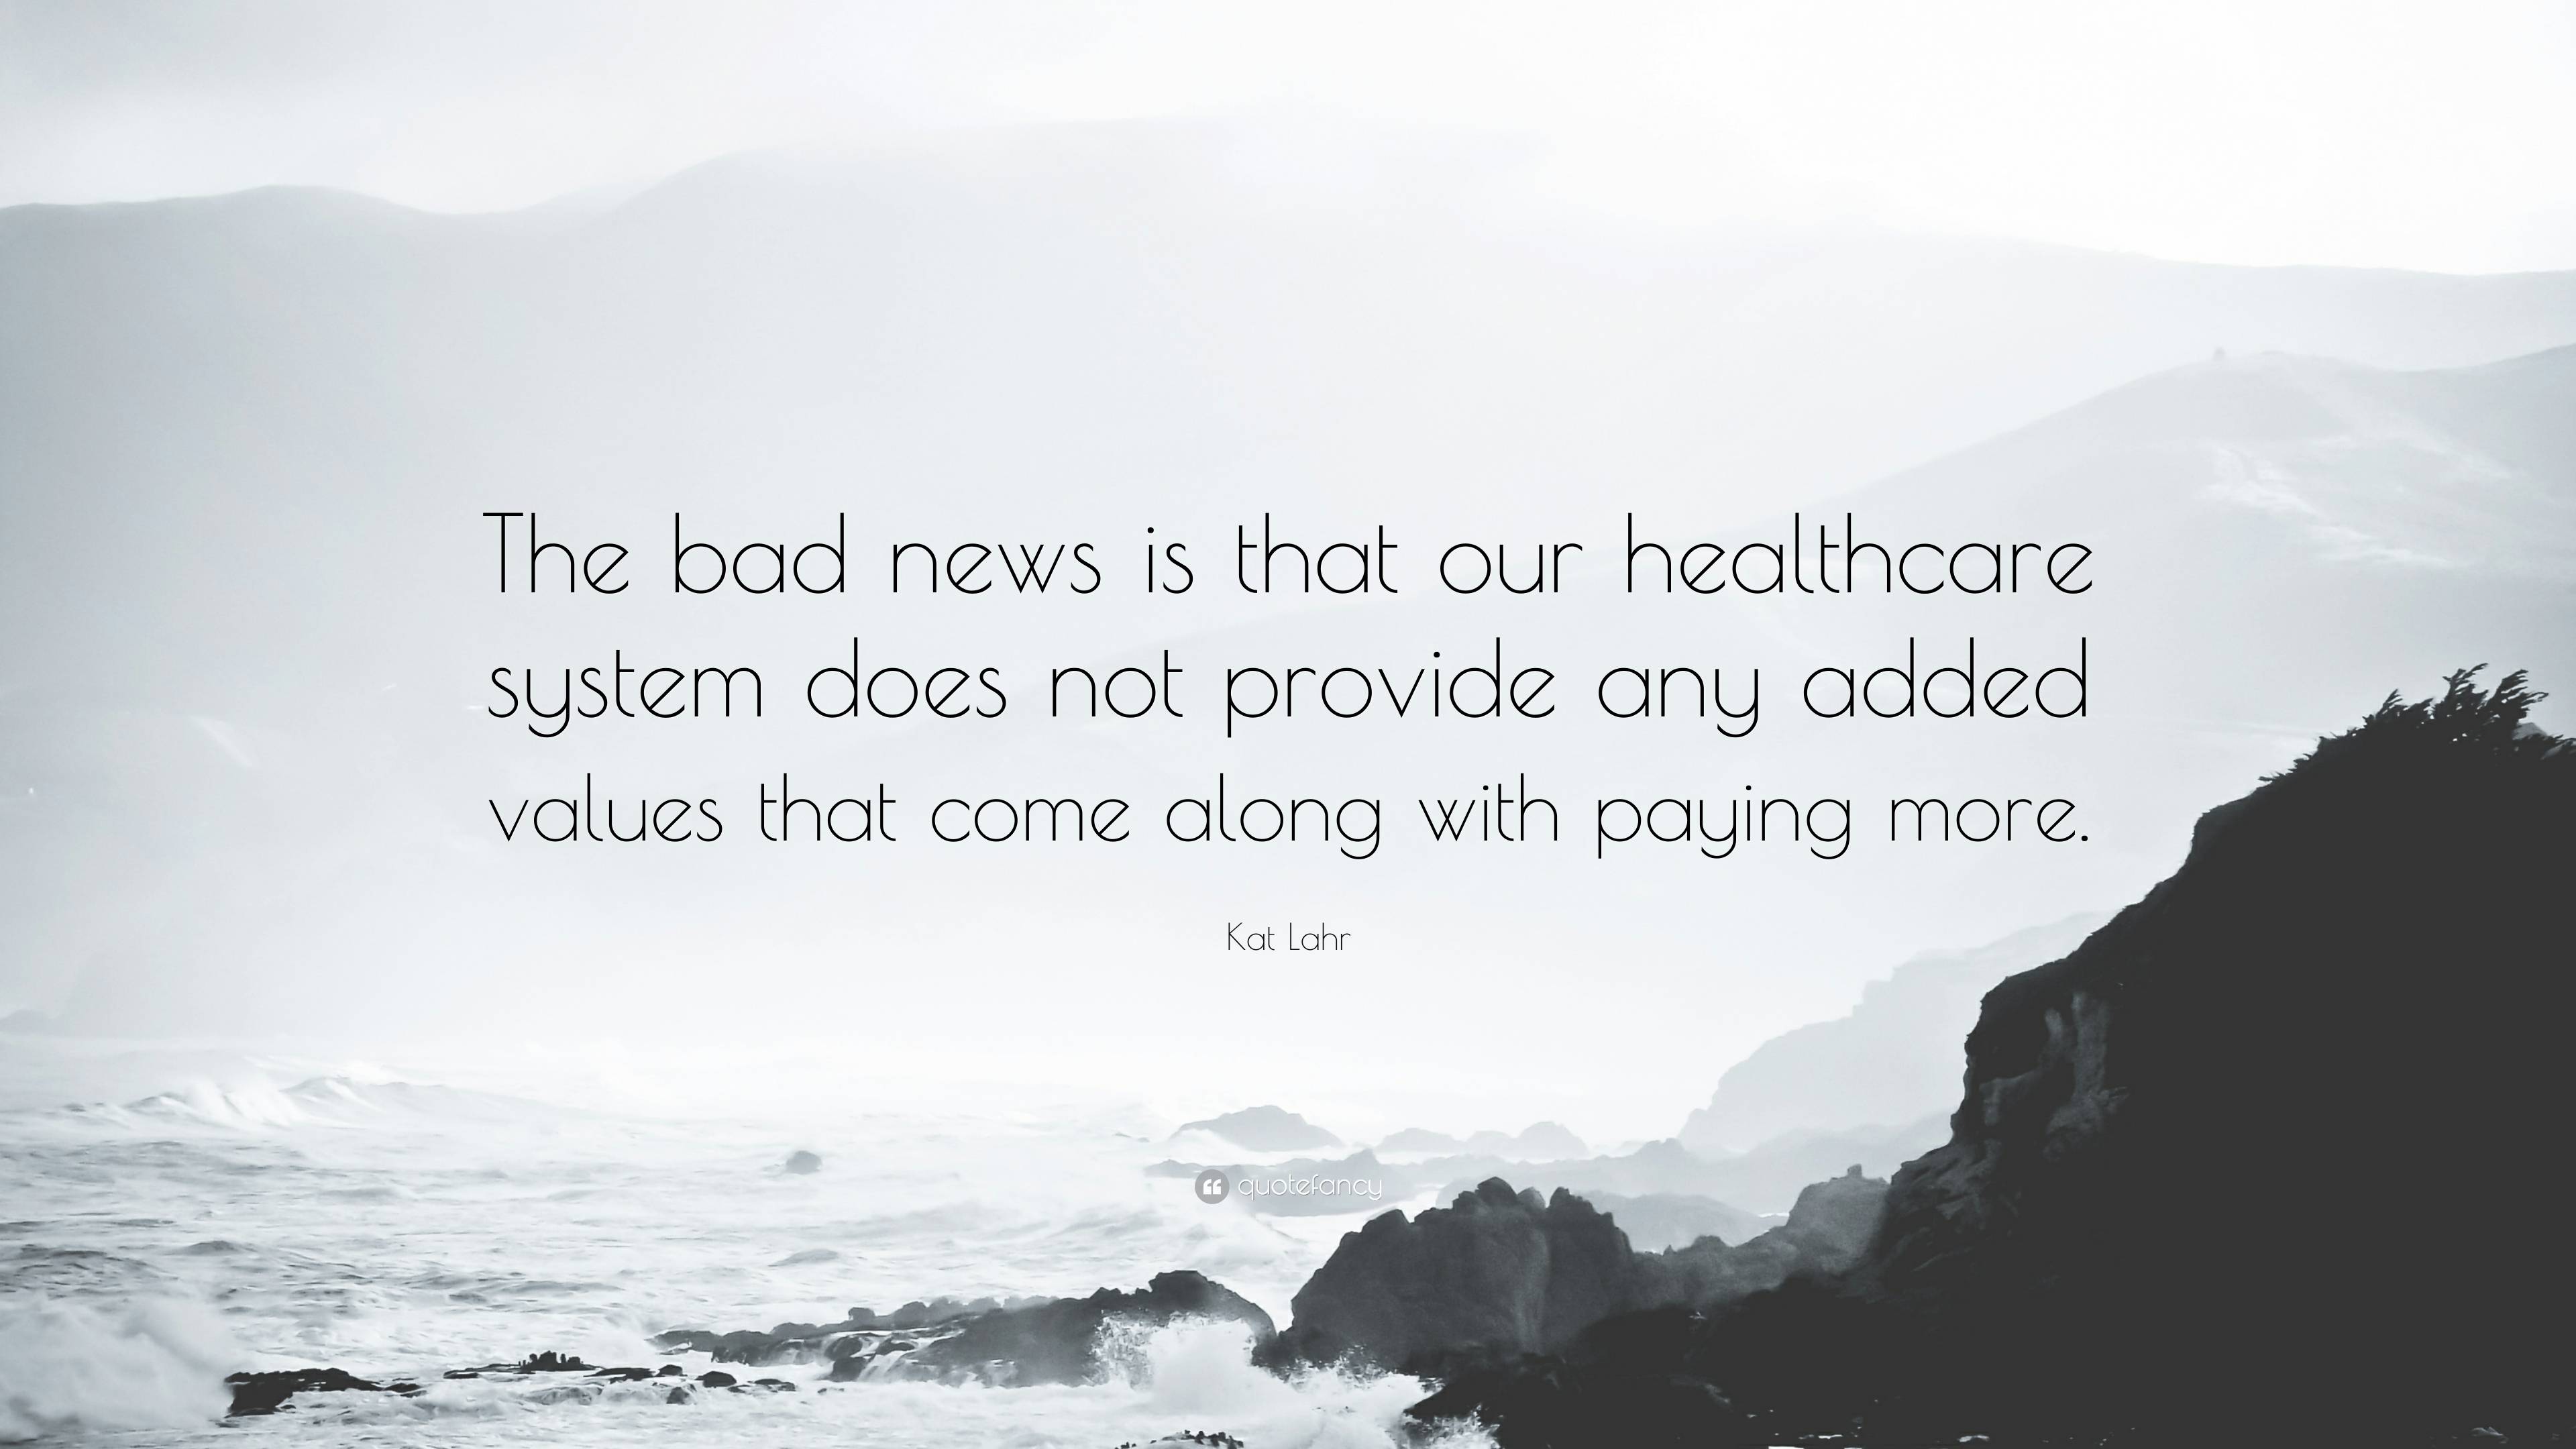 Kat Lahr “The bad news is our system does not any added